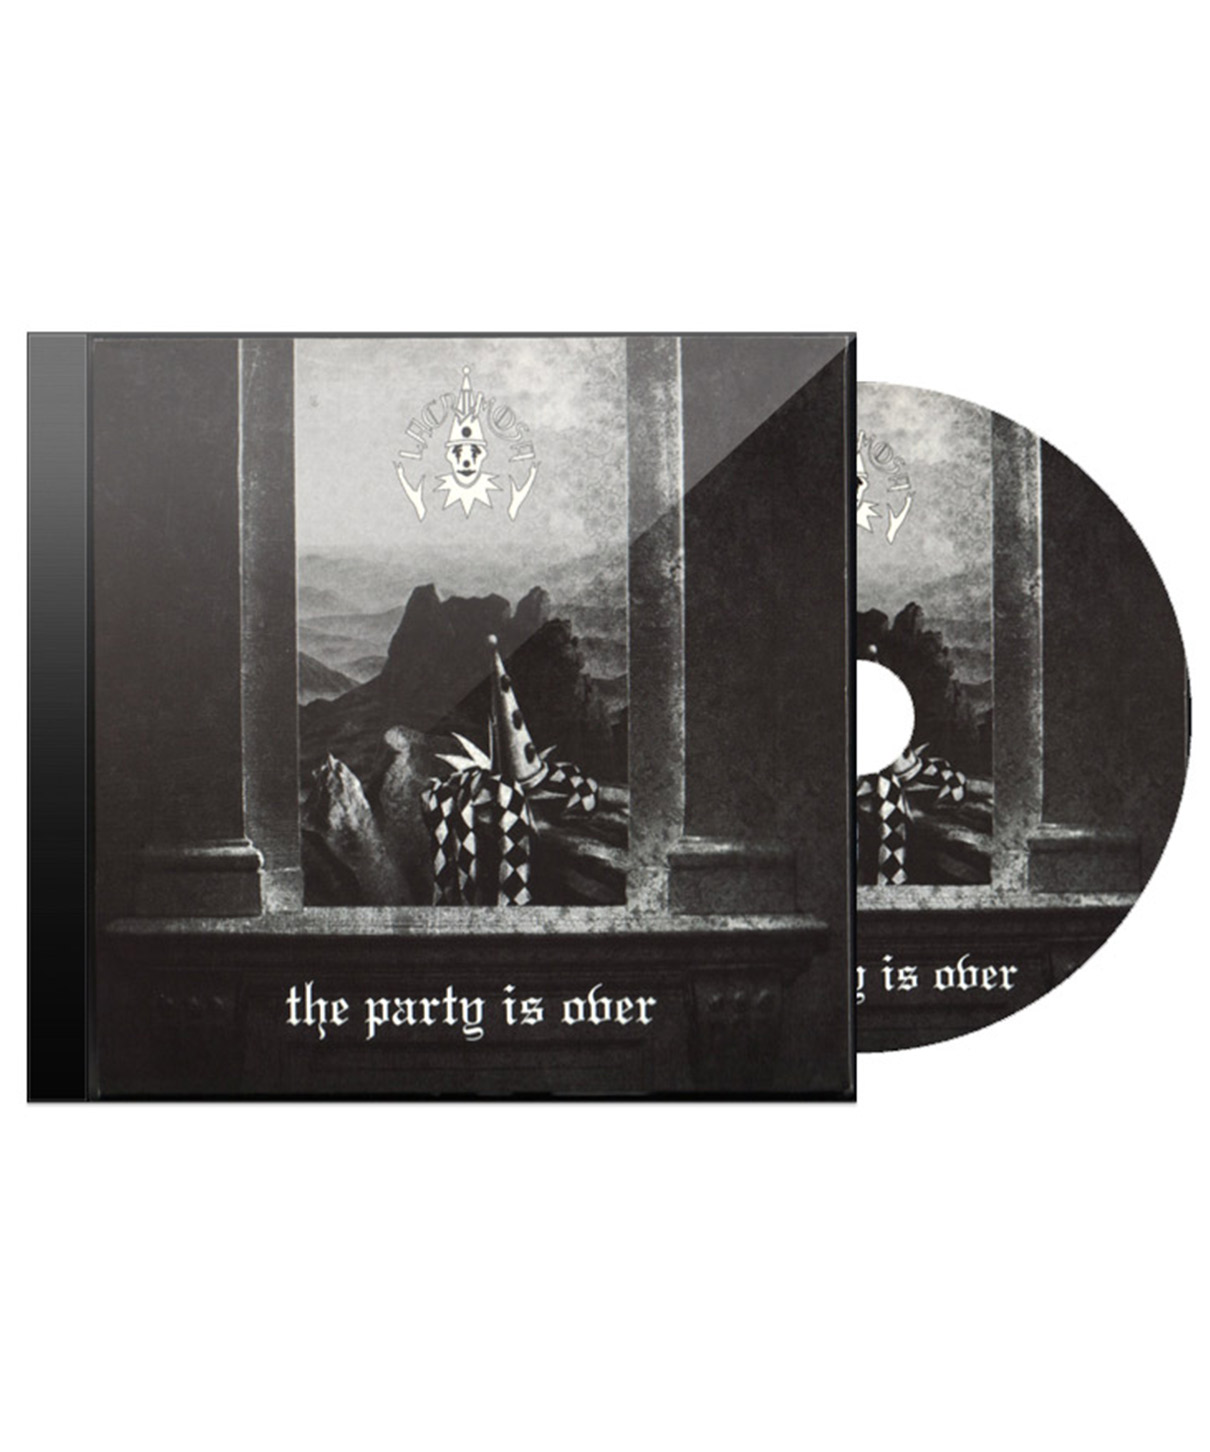 CD Диск Lacrimosa The Party Is Over - фото 1 - rockbunker.ru